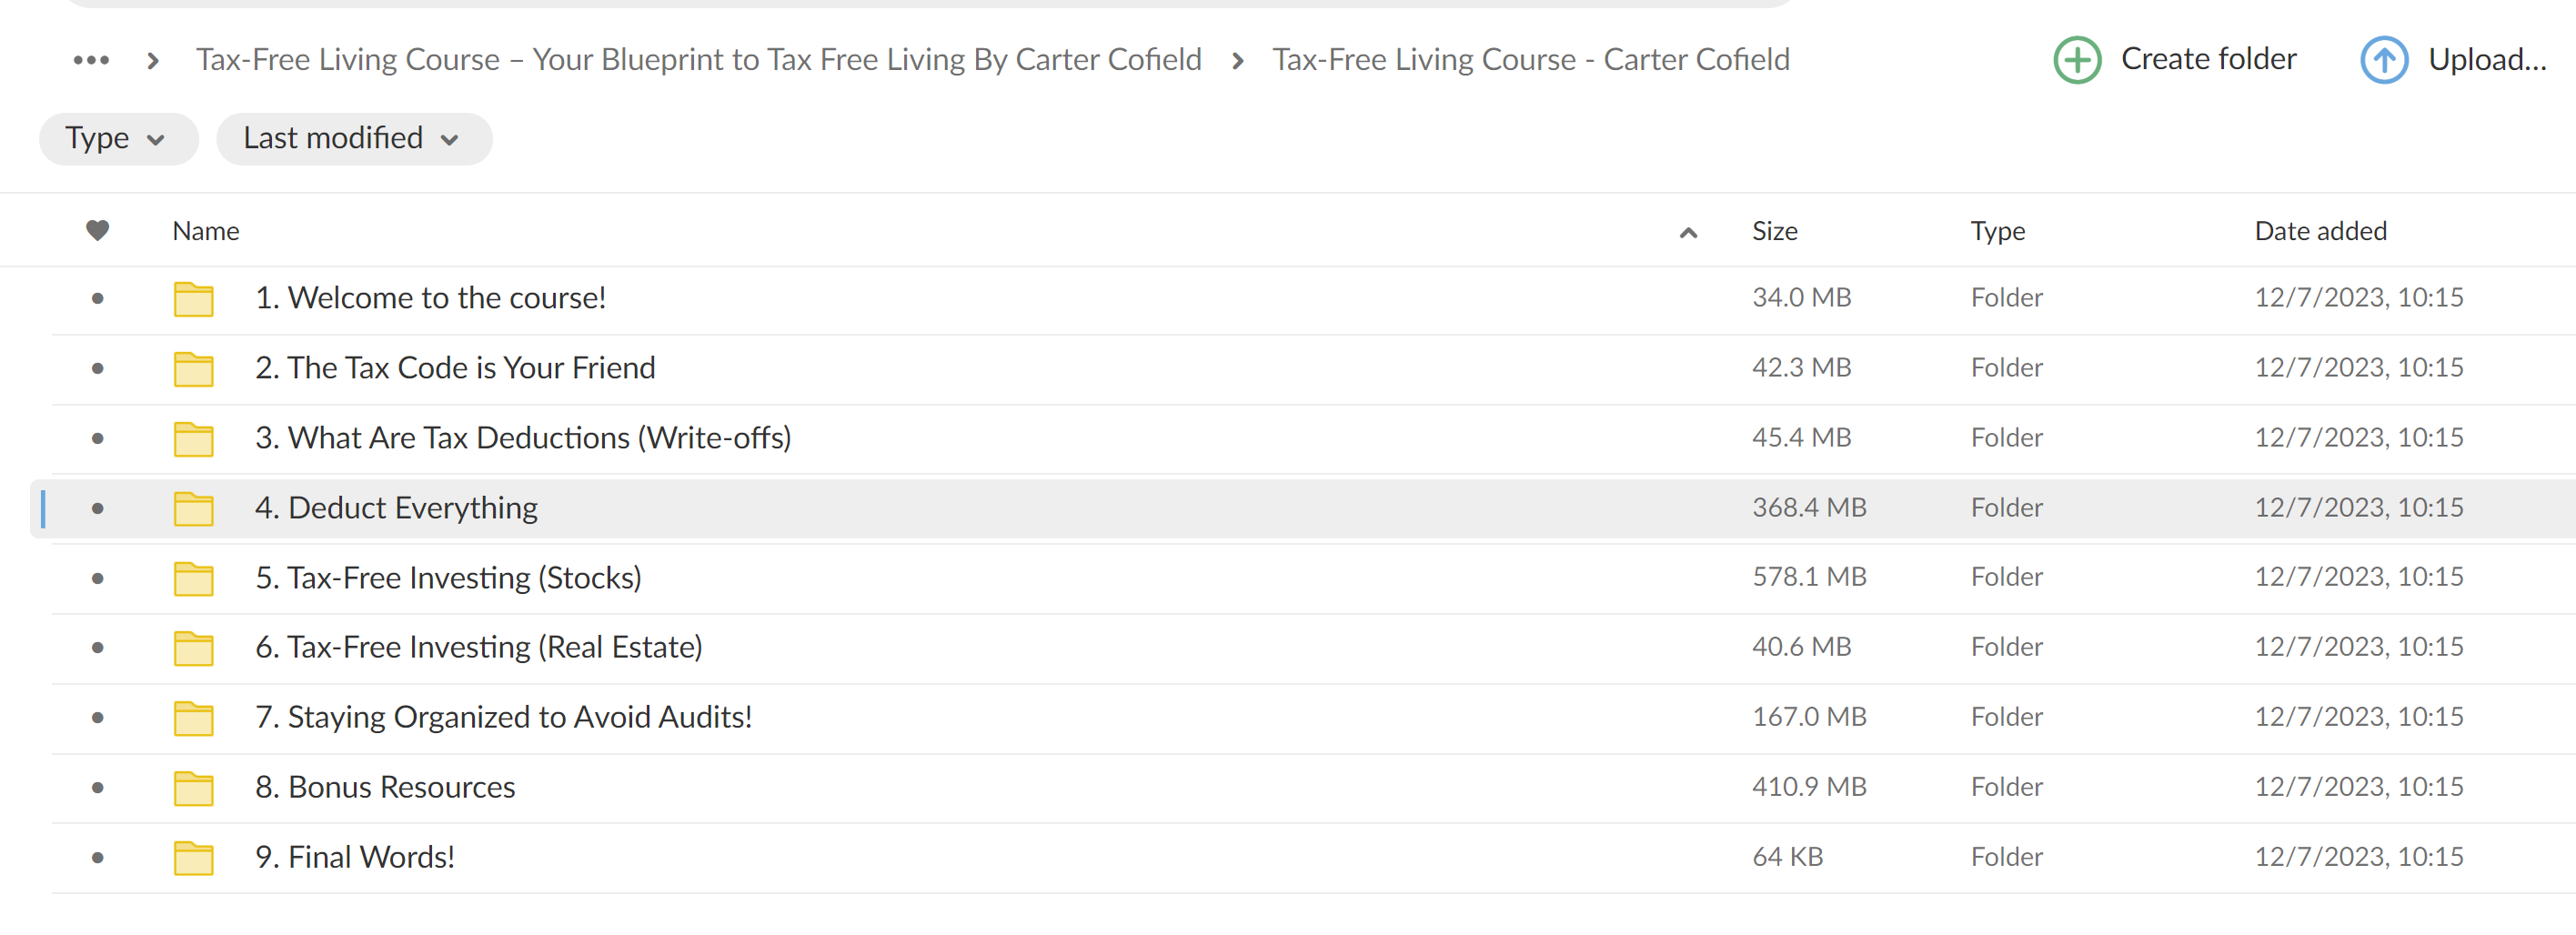 Carter Cofield Tax Free Living Course